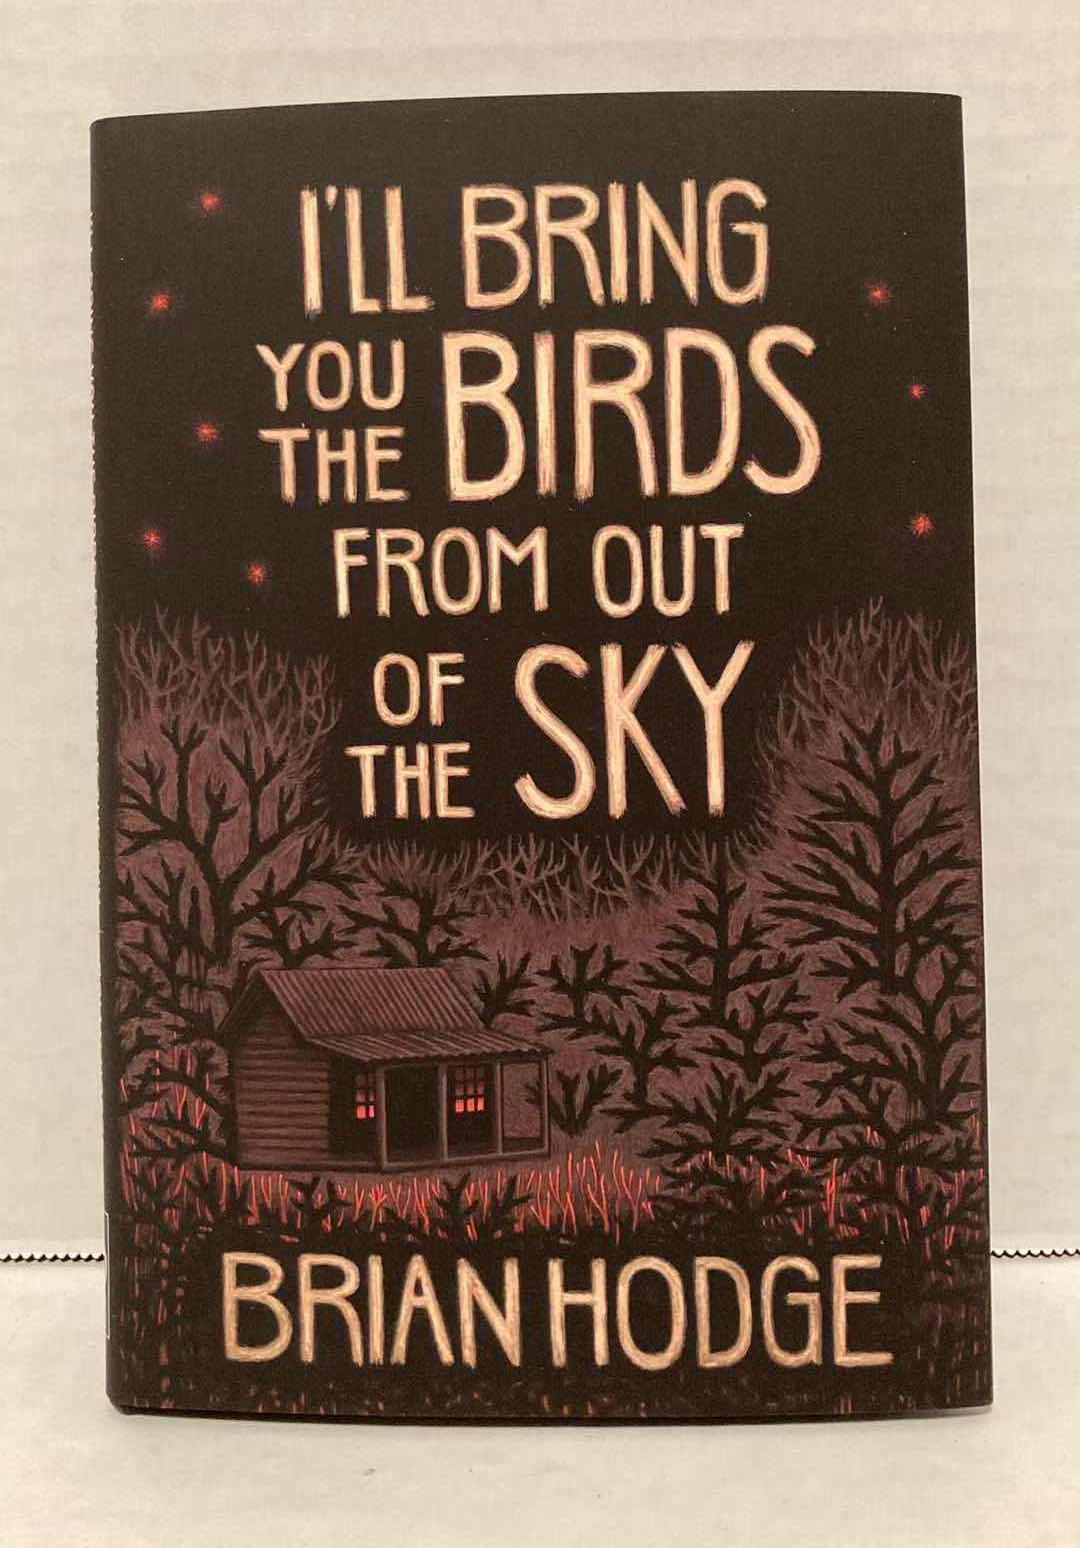 Photo 1 of BRIAN HODGE - I’LL BRING YOU THE BIRDS FROM OUT OF THE SKY BOOK SIGNED BY BRIAN HODGE